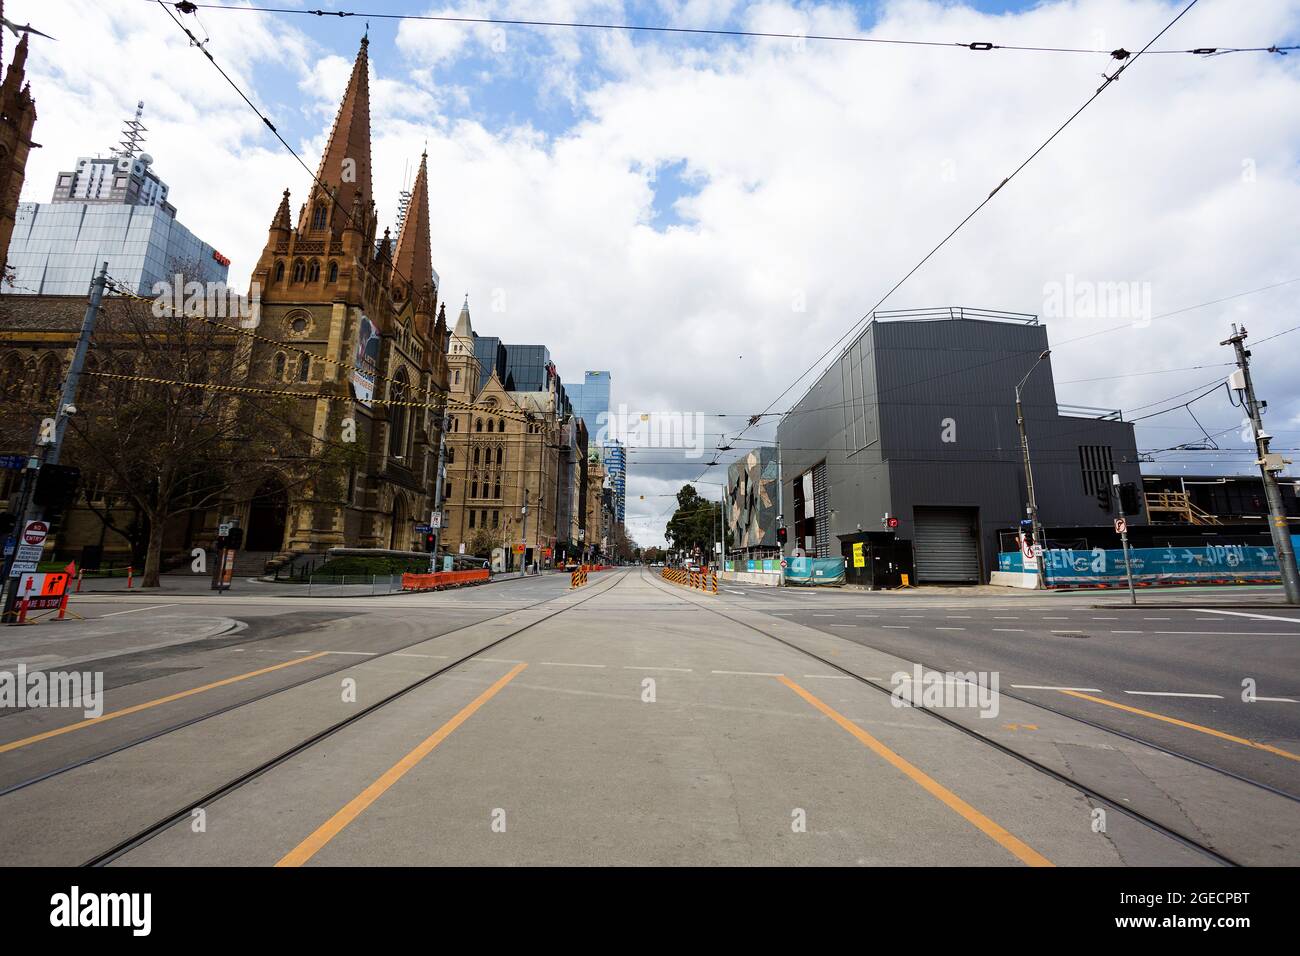 Melbourne, Australia, 6 August, 2020. A view of Flinders Street during COVID-19 in Melbourne, Australia. Stage 4 restrictions continue in Melbourne as work permits come into effect at midnight today. This comes as a further 471 new COVID-19 cases were uncovered overnight. Credit: Dave Hewison/Speed Media/Alamy Live News Stock Photo